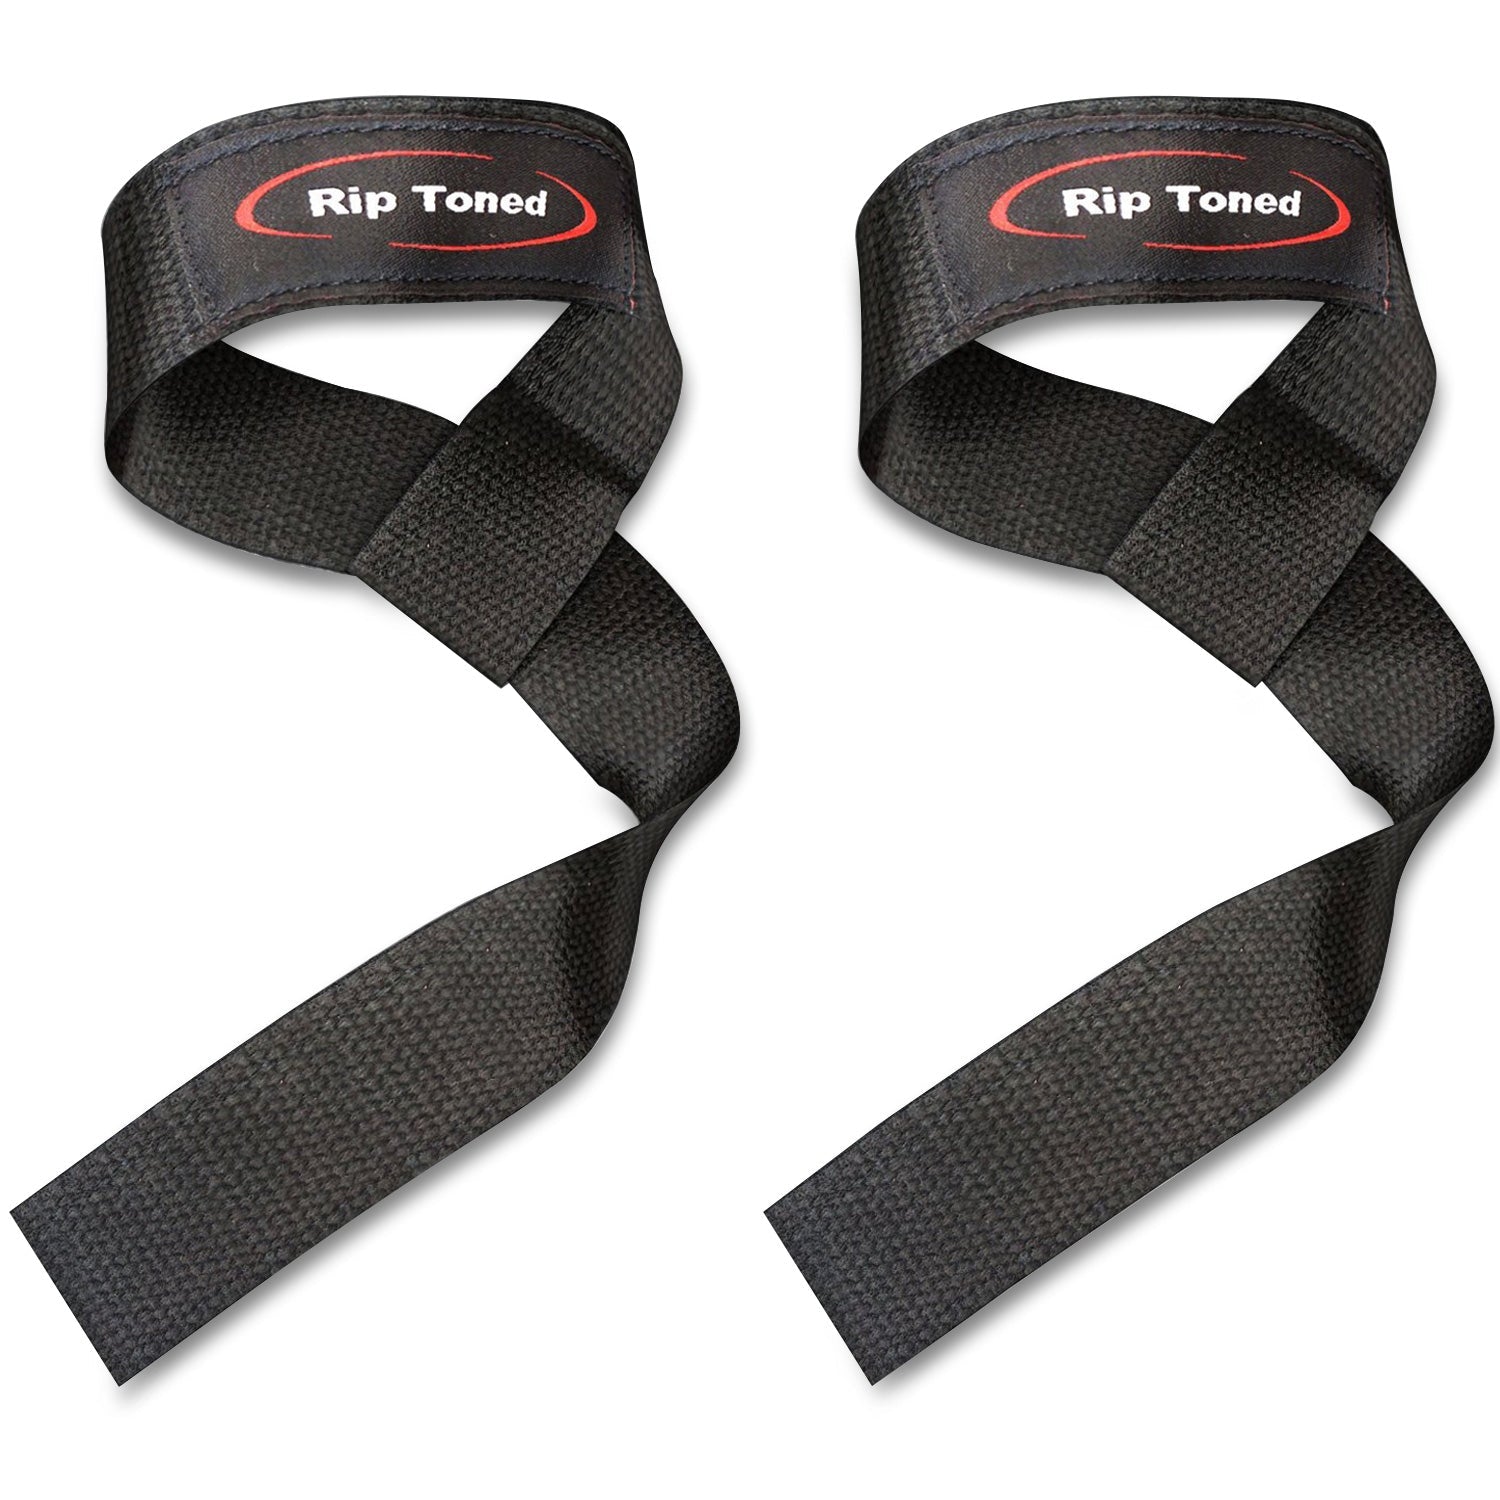 Weightlifting Straps - Lift More Weight, More Reps, More Gains – Rip Toned